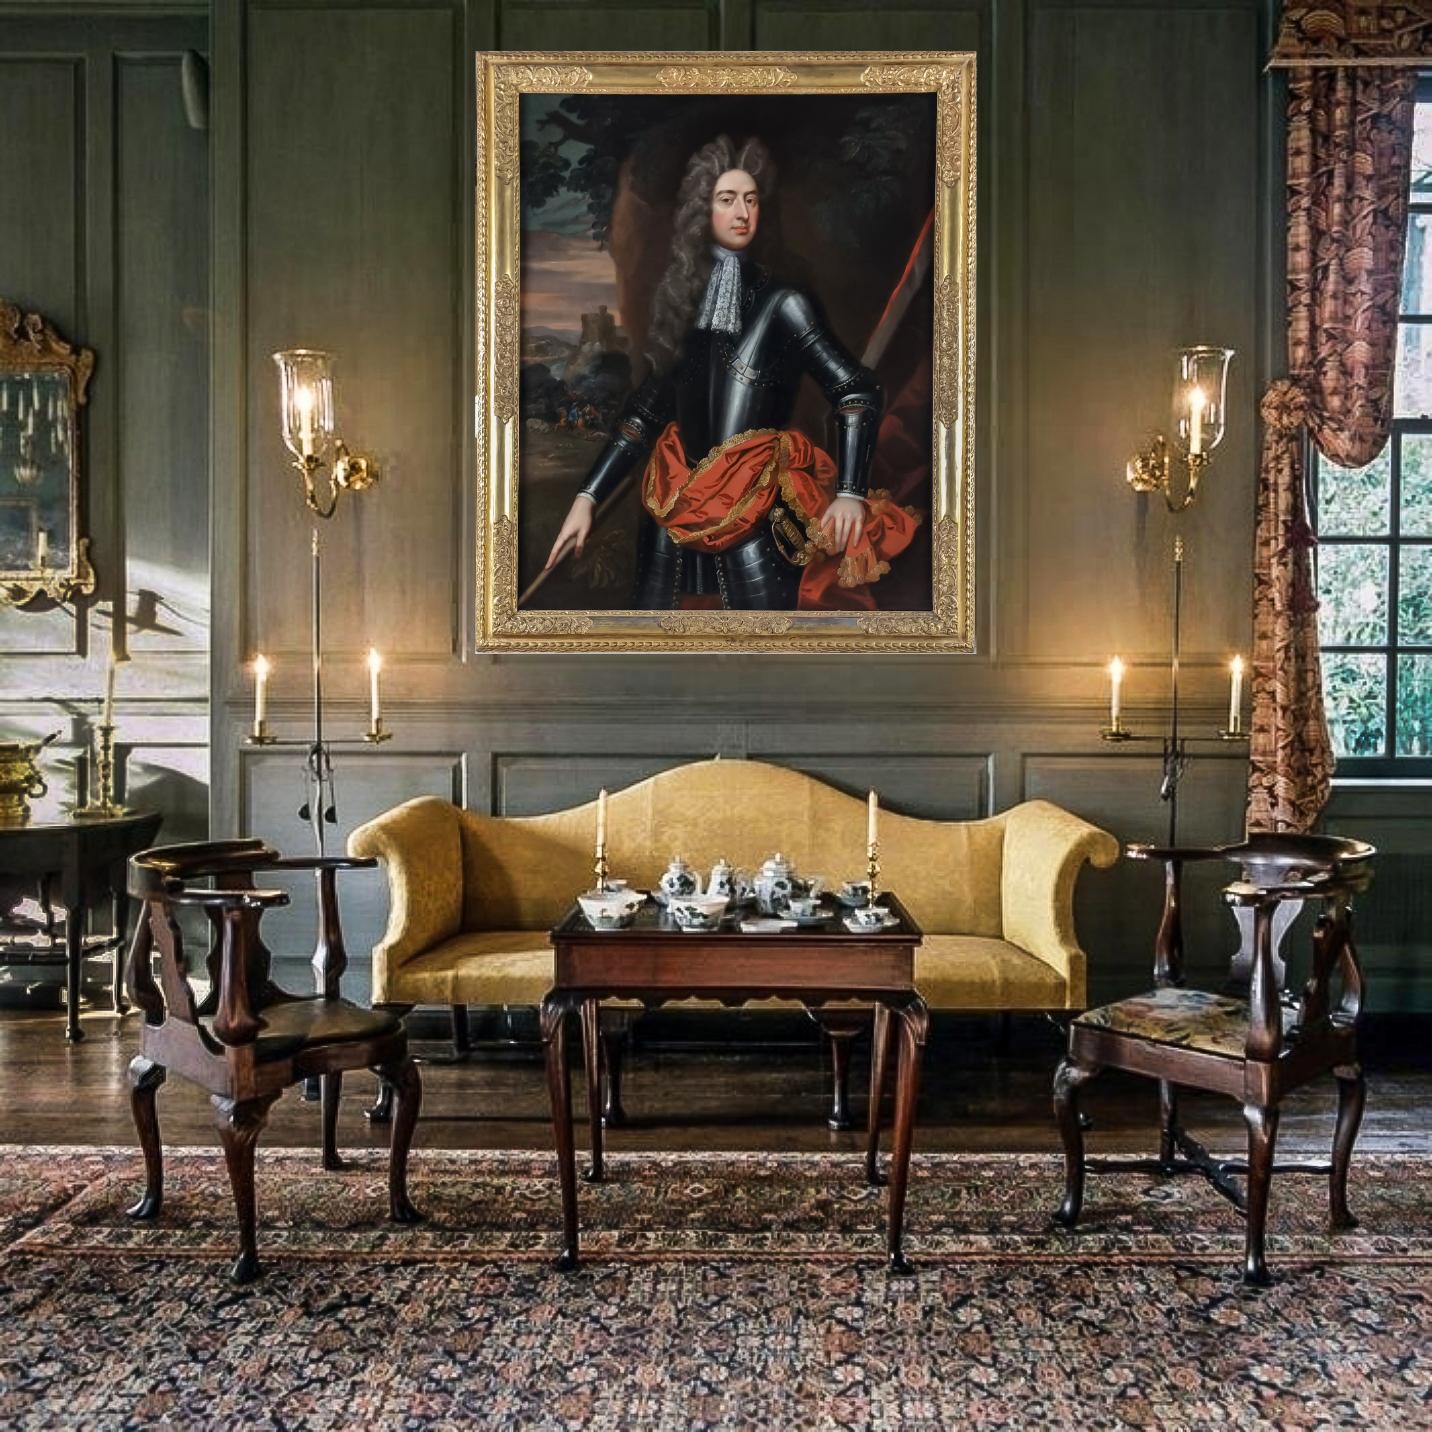 This exquisite work formed part of the collection of the Gregory family, descendants of the sitter, at their immensely impressive home Harlaxton Manor, Grantham.  Our portrait, and the contents of the manor, were sold in 1937 following the death of